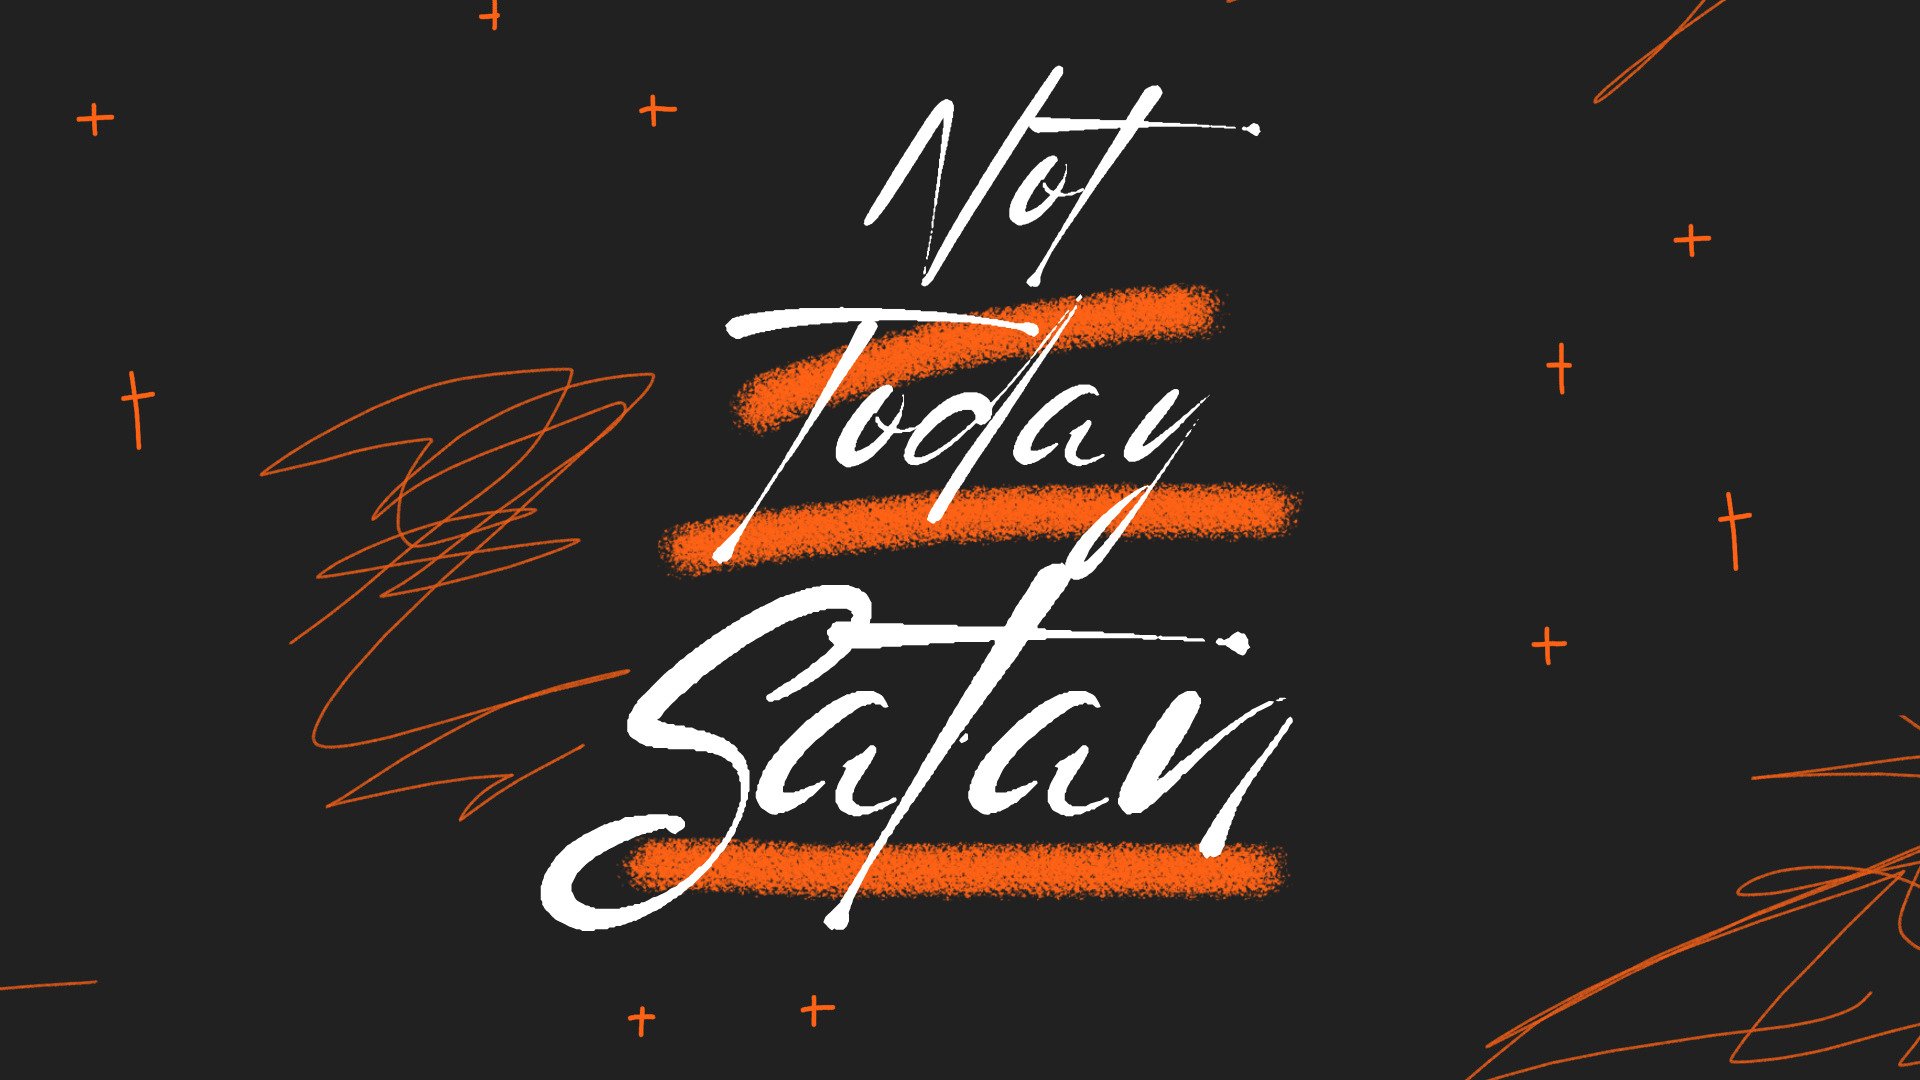 Not Today Satan 4K 3840 × 2160 Px 1 | Remix Church Media | Editable Design Templates And Resources Made For The Church.